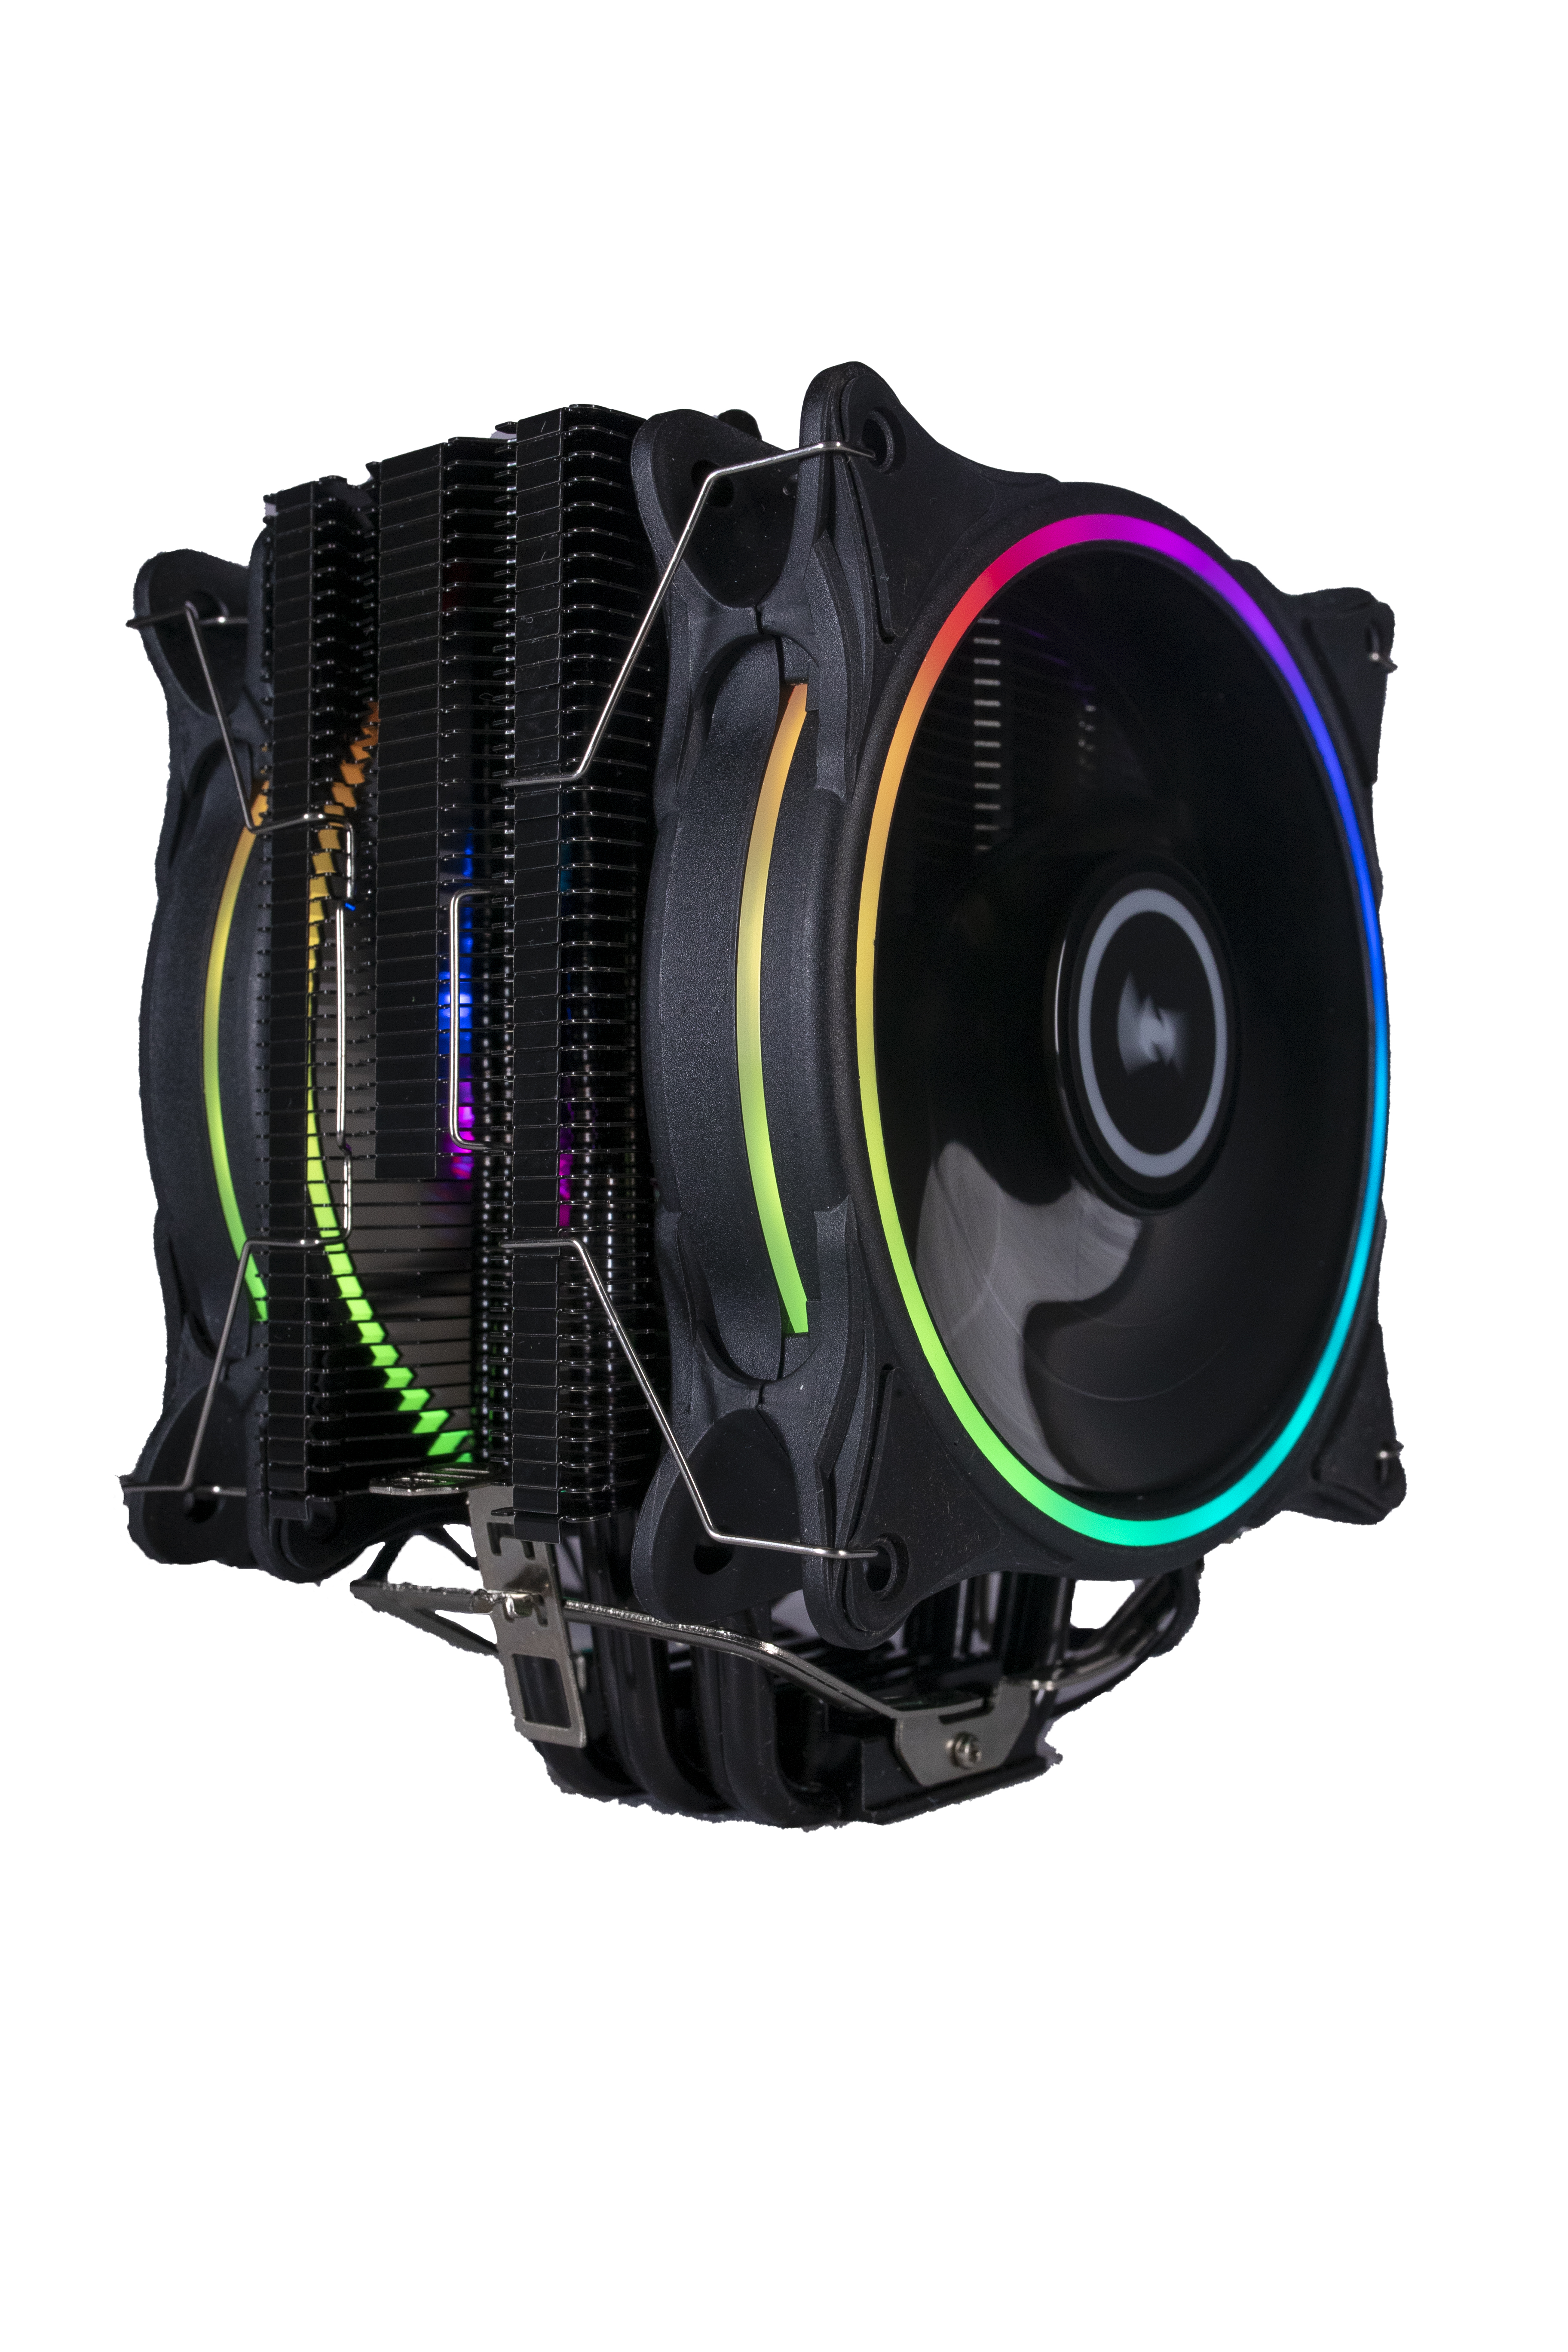 Volted Cool 290 CPU Air Cooler